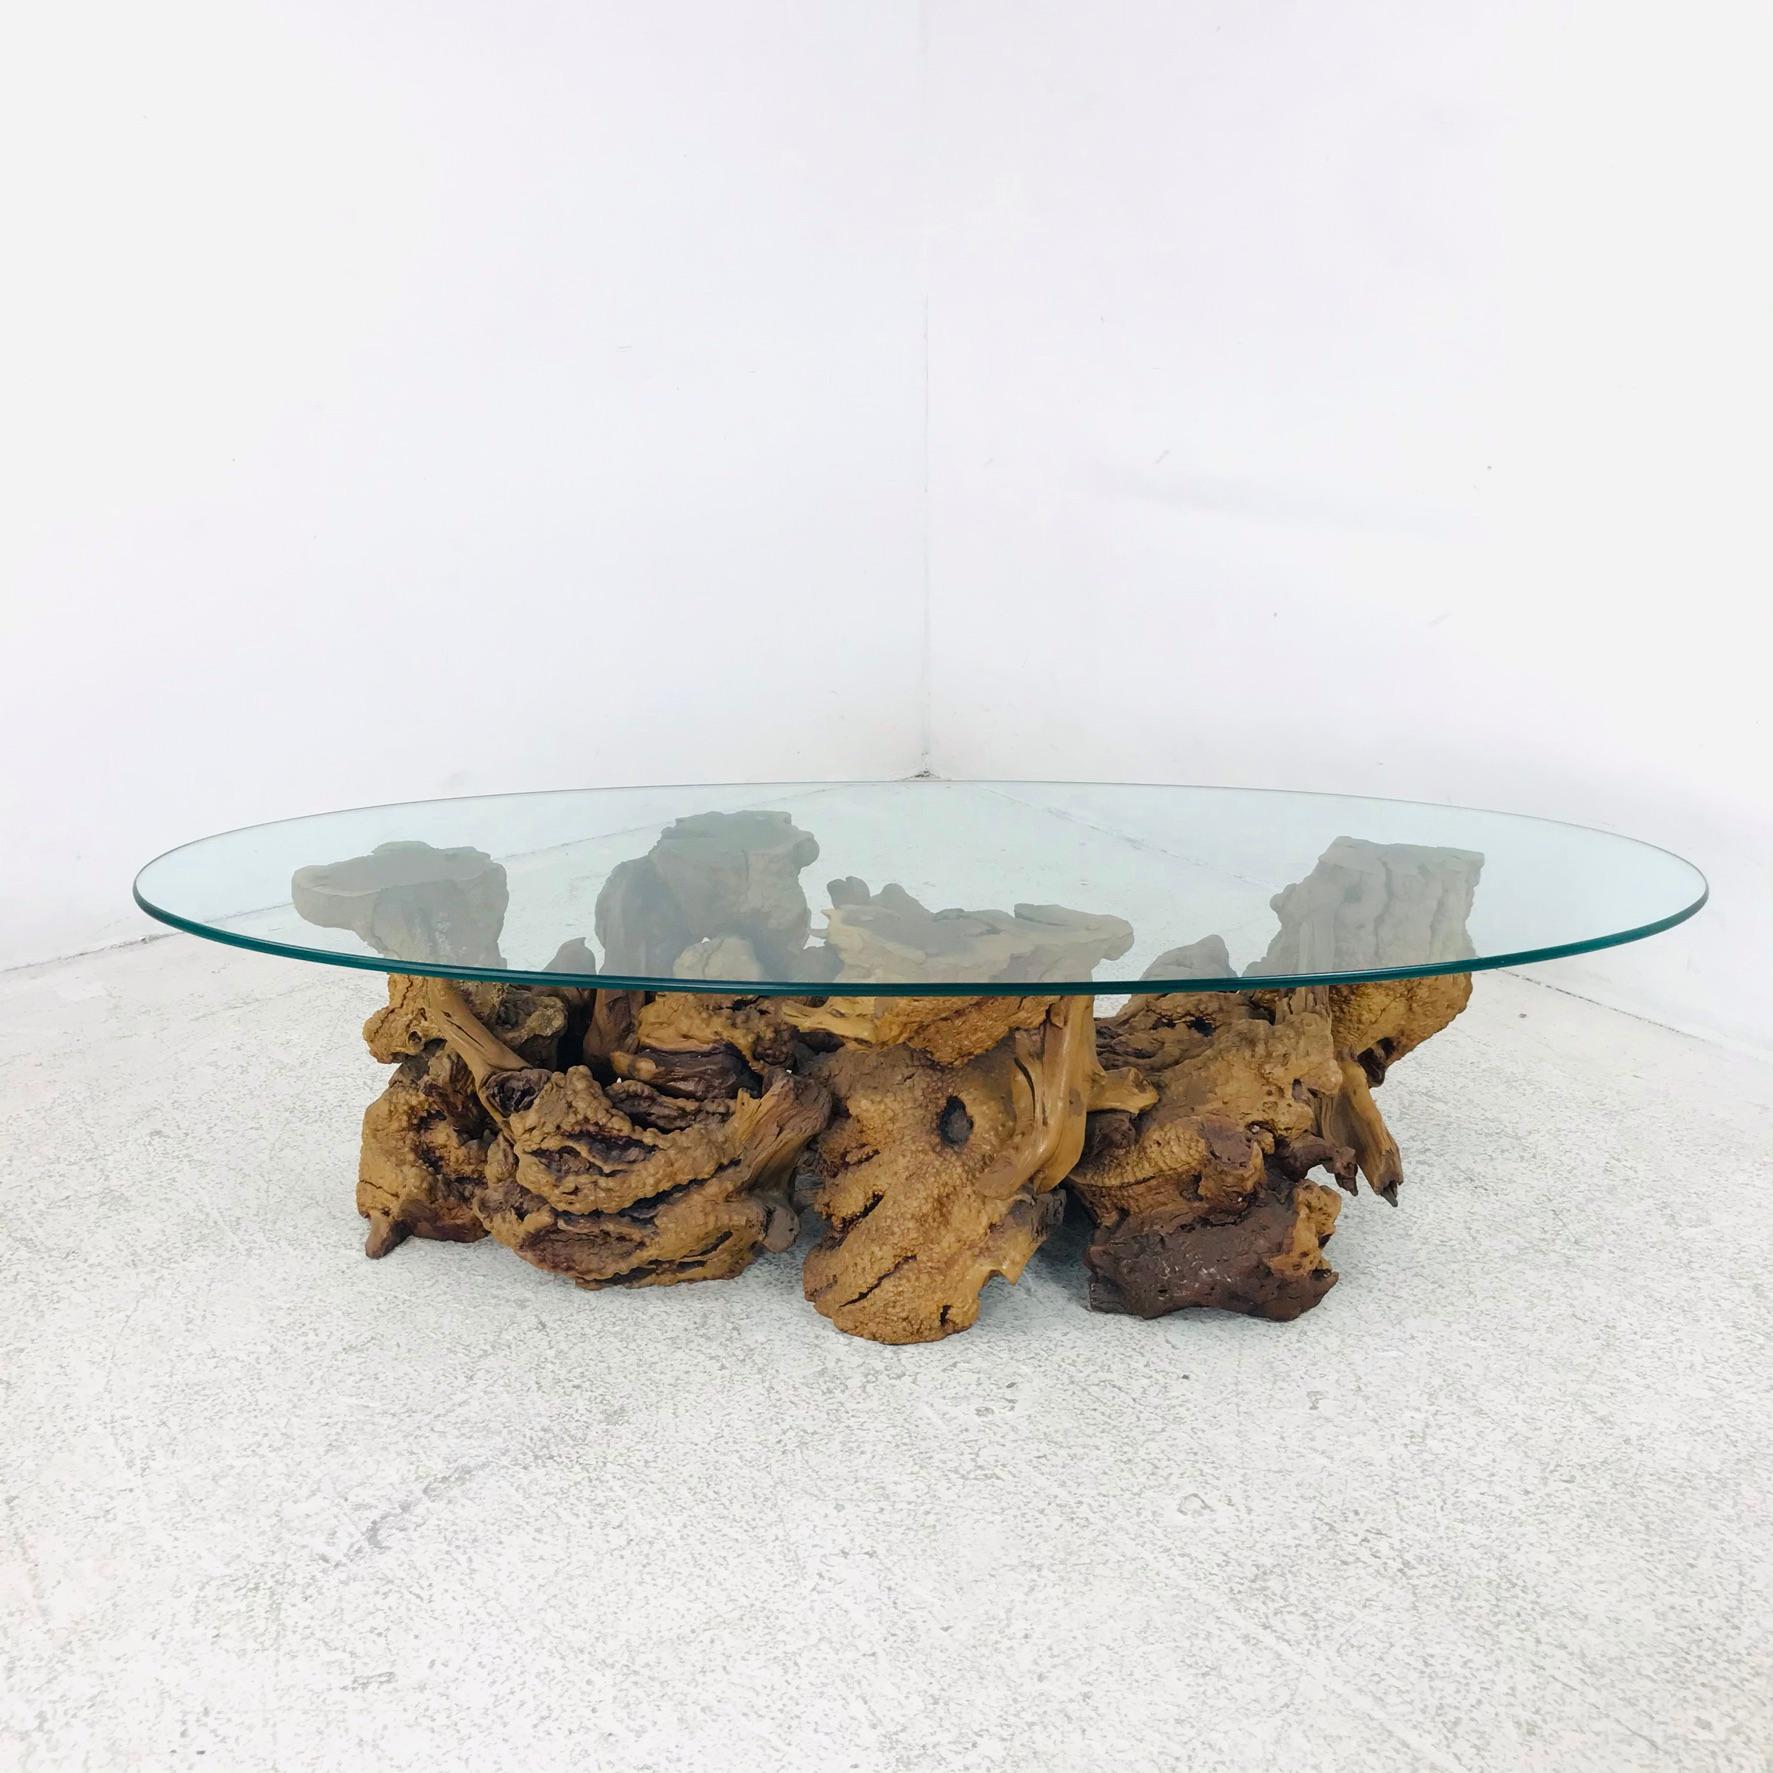 Unique sculptural burled root coffee table with glass top.